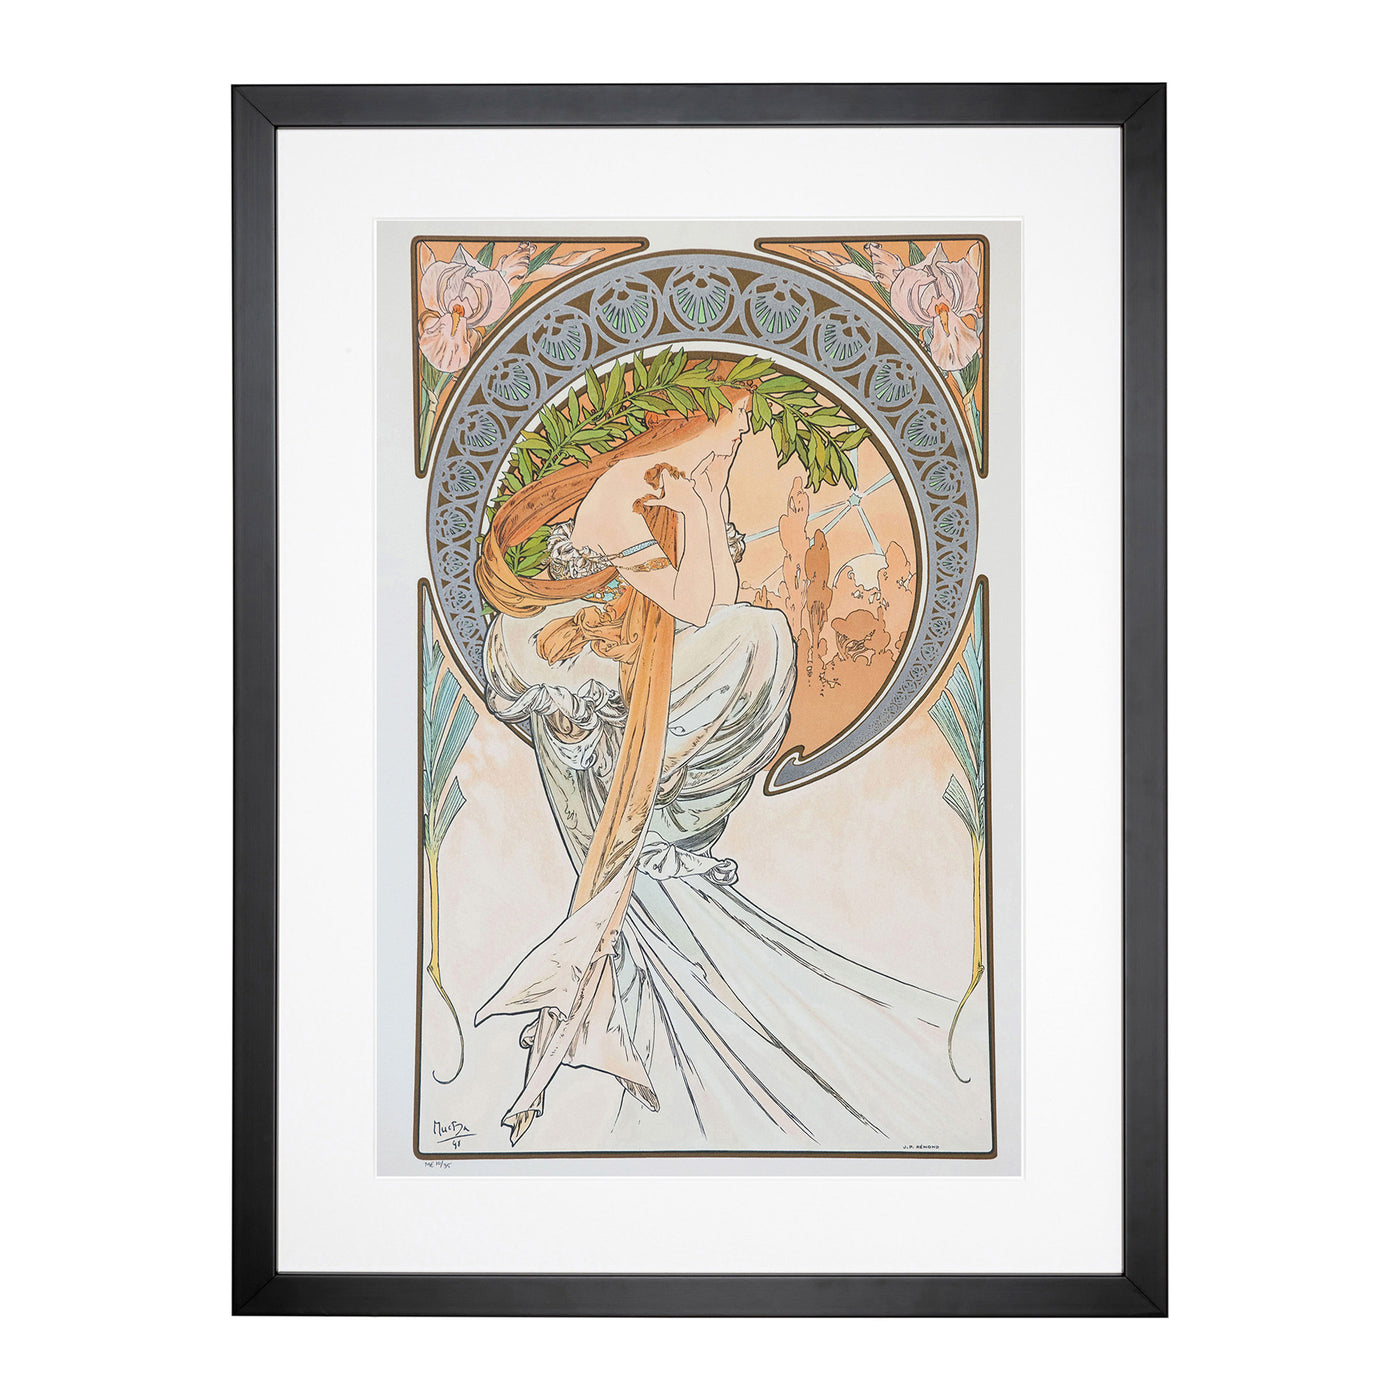 The Arts Poetry Vol.2 By Alphonse Mucha